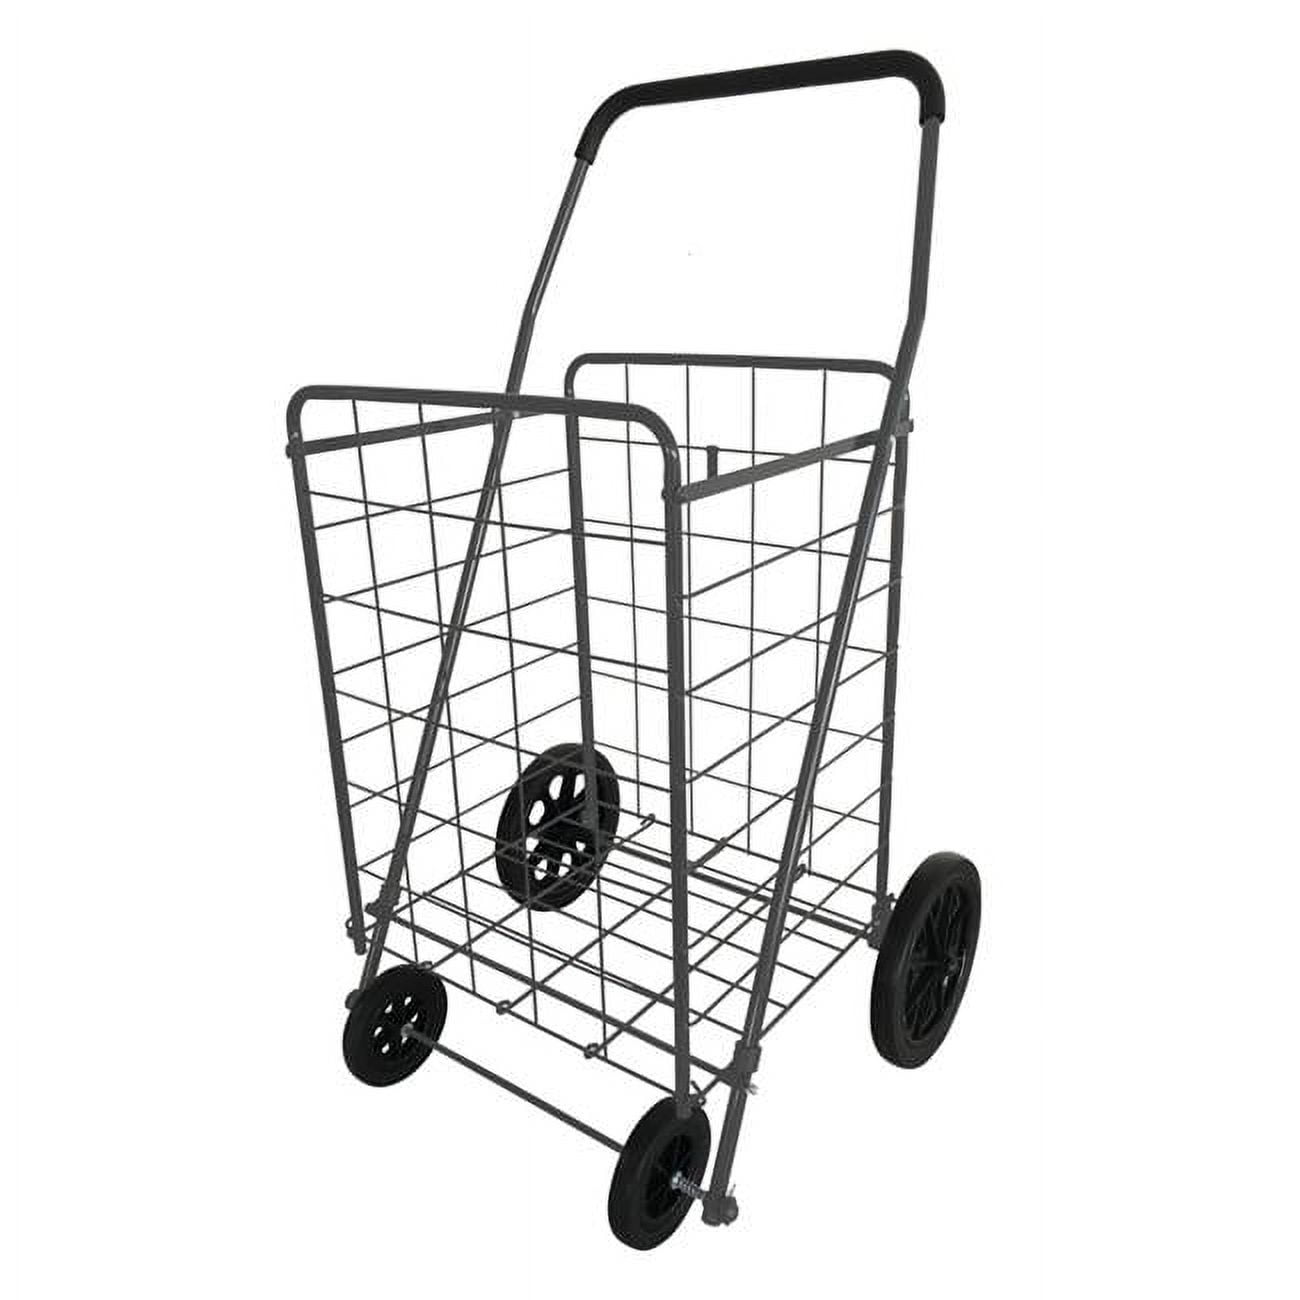 Picture of Apex 6029571 40.6 x 21.7 x 24.4 in. Gray Collapsible Shopping Cart